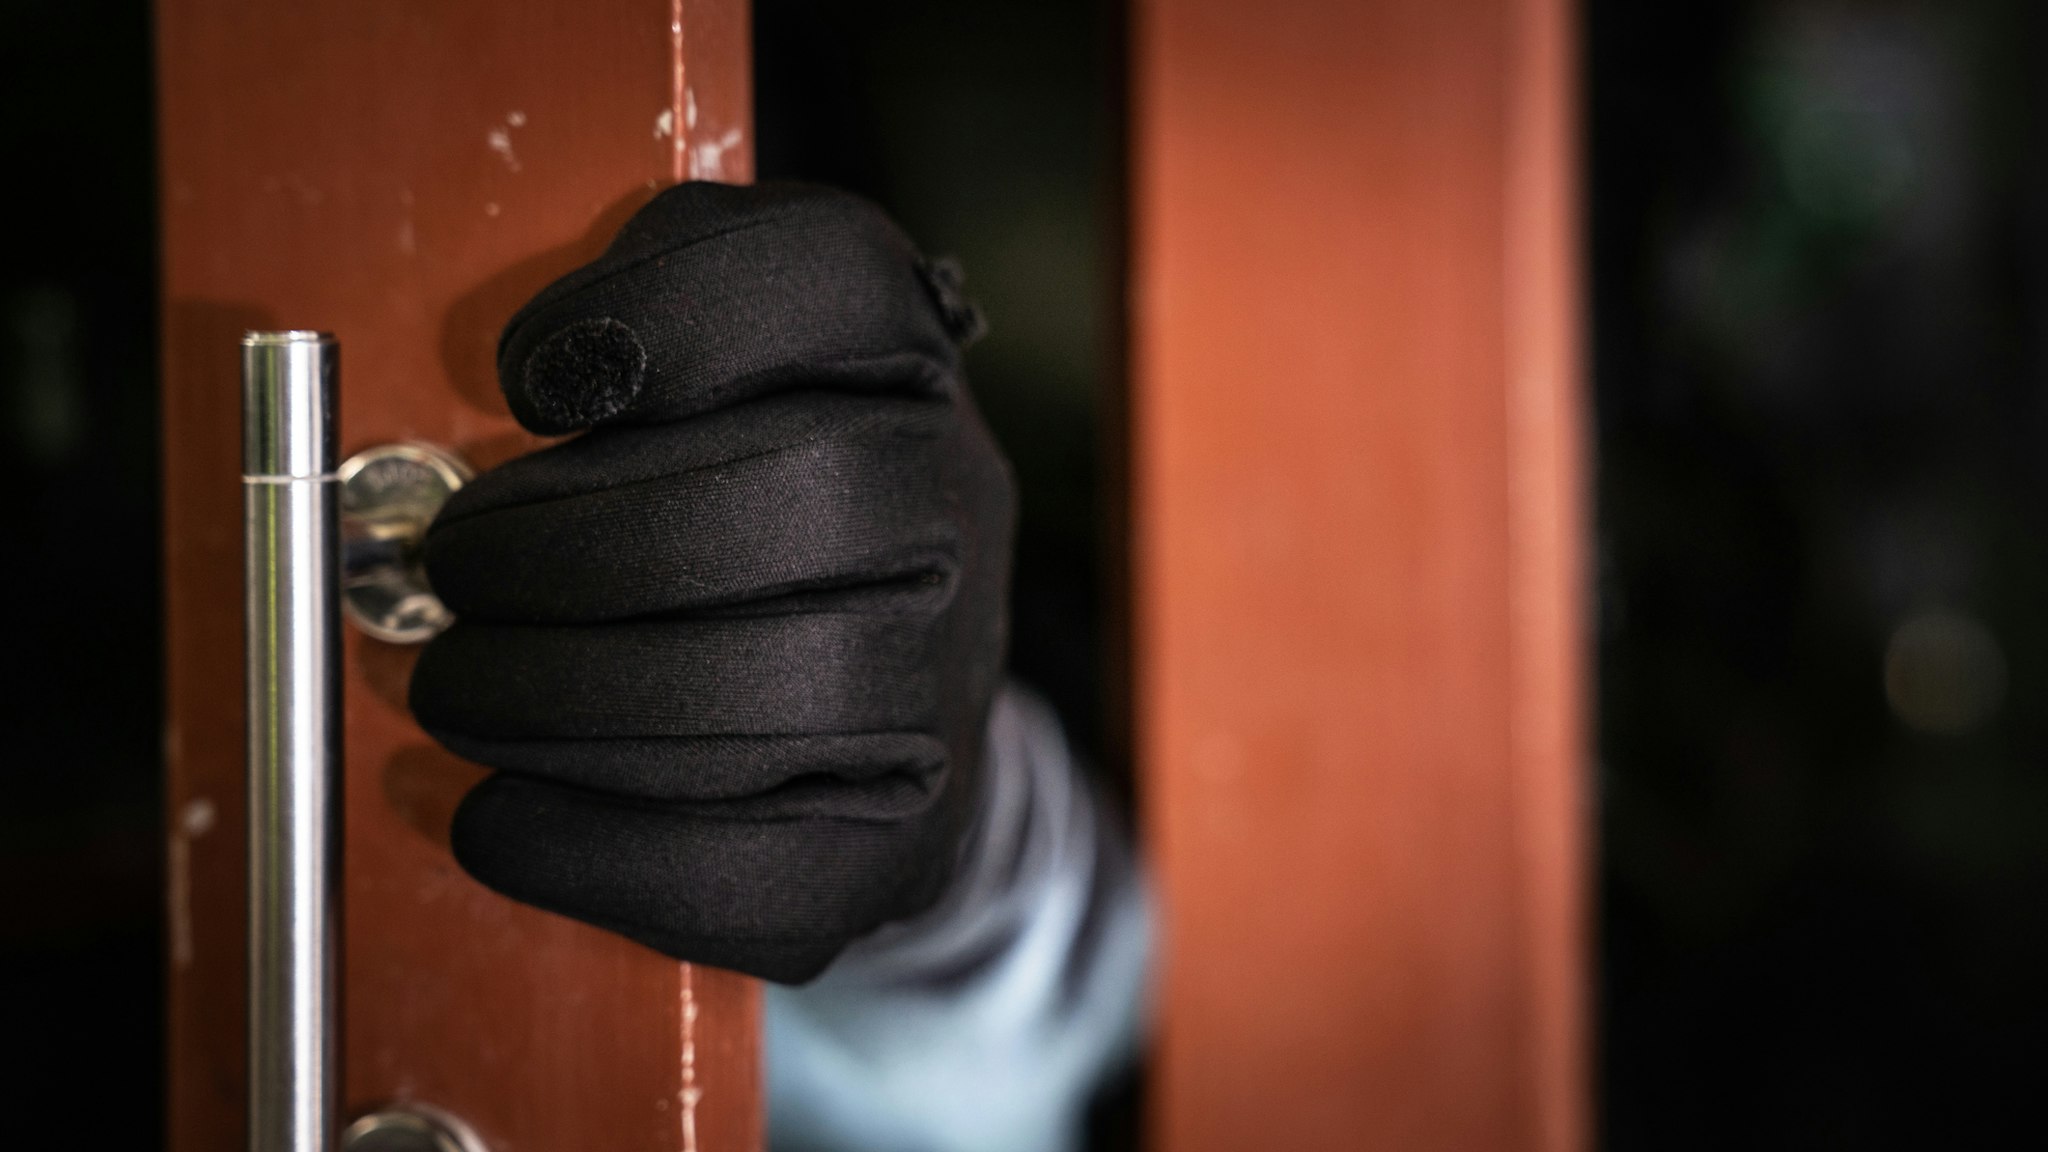 dangerous masked burglar with crowbar breaking into a victim's home door,Home insurance concept - stock photo